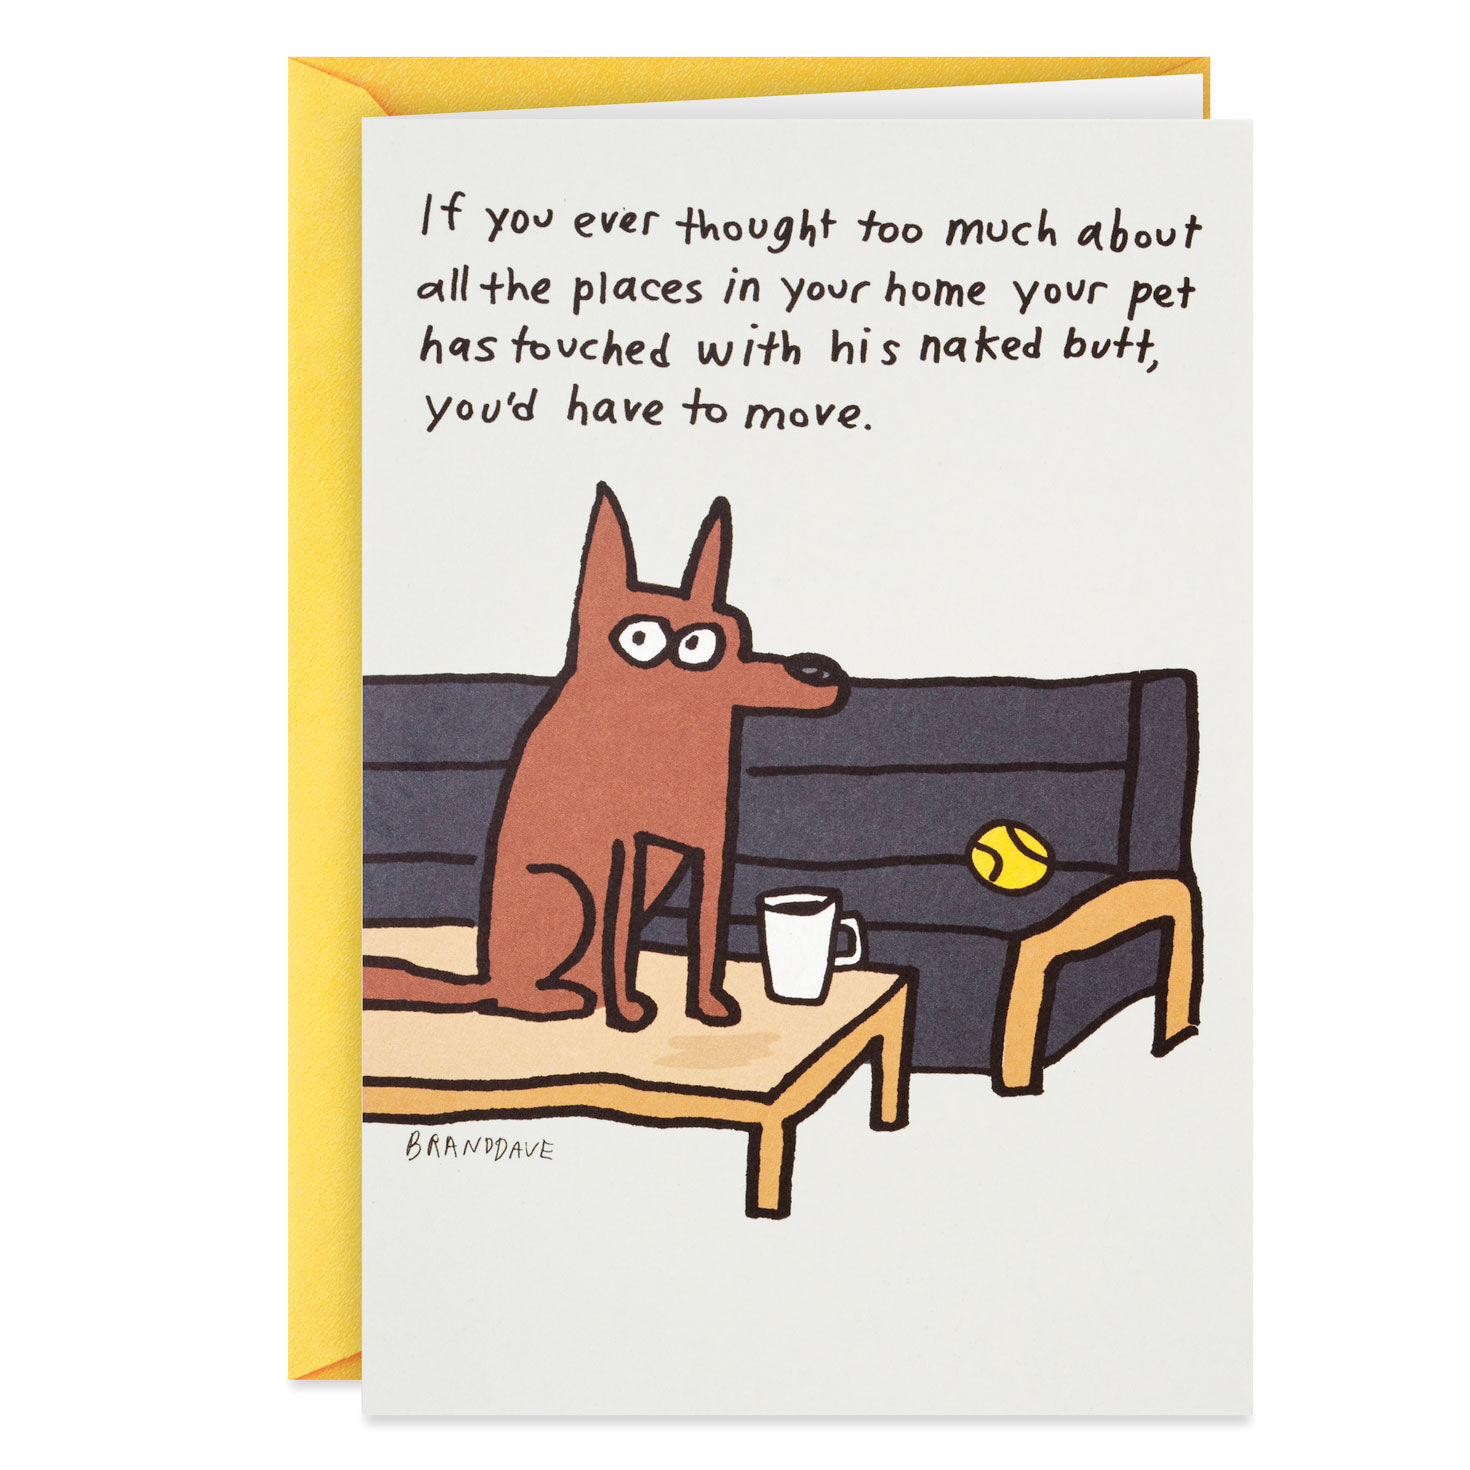 Where the Dog Sits Funny Birthday Card for only USD 3.69 | Hallmark